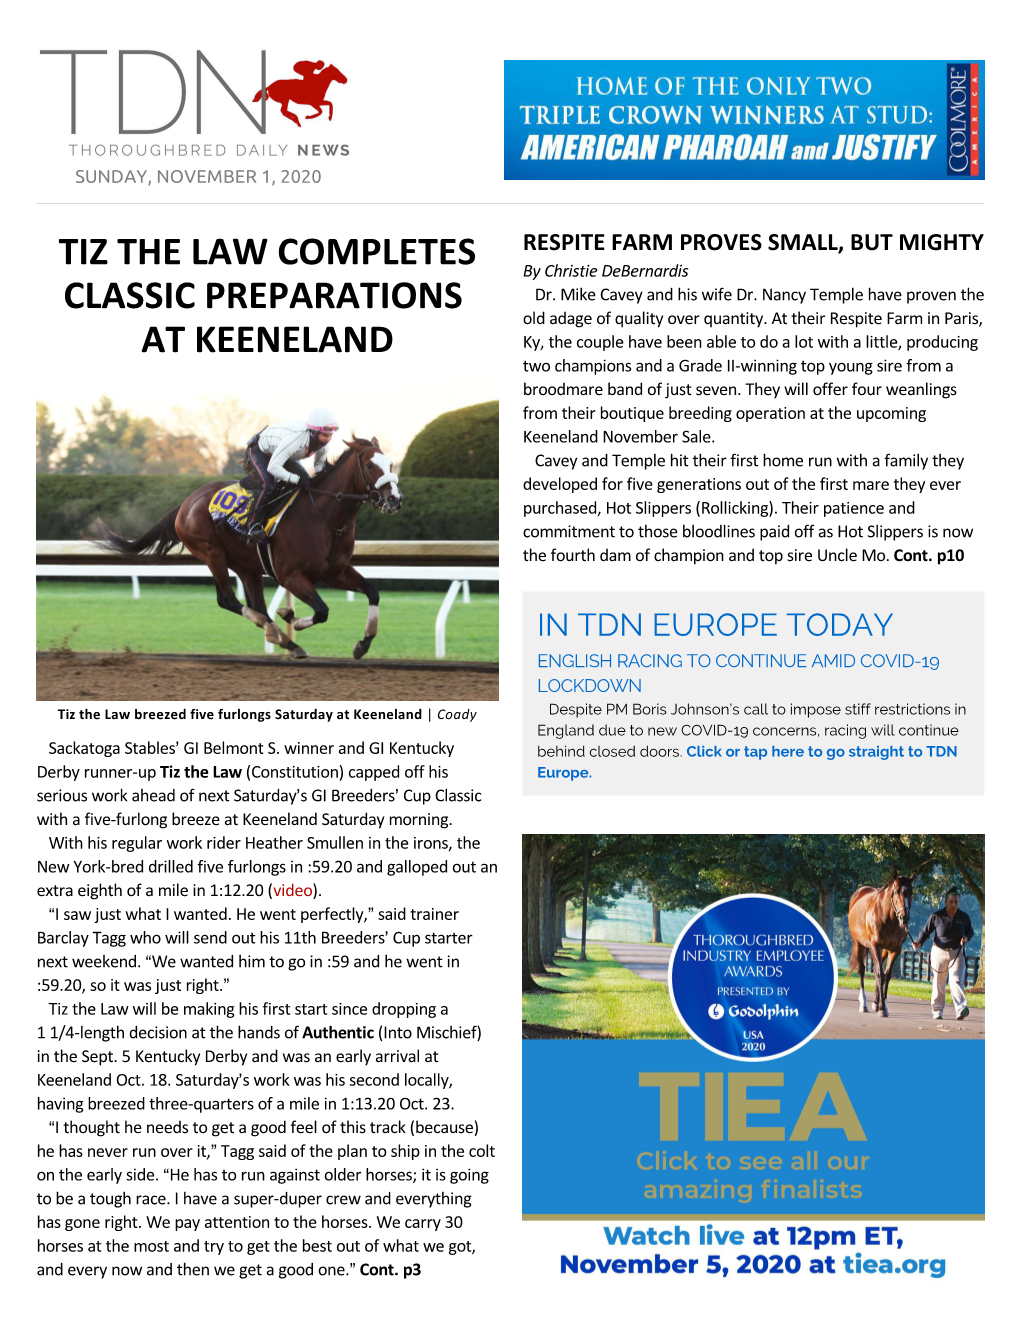 Tiz the Law Completes Classic Preparations at Keeneland